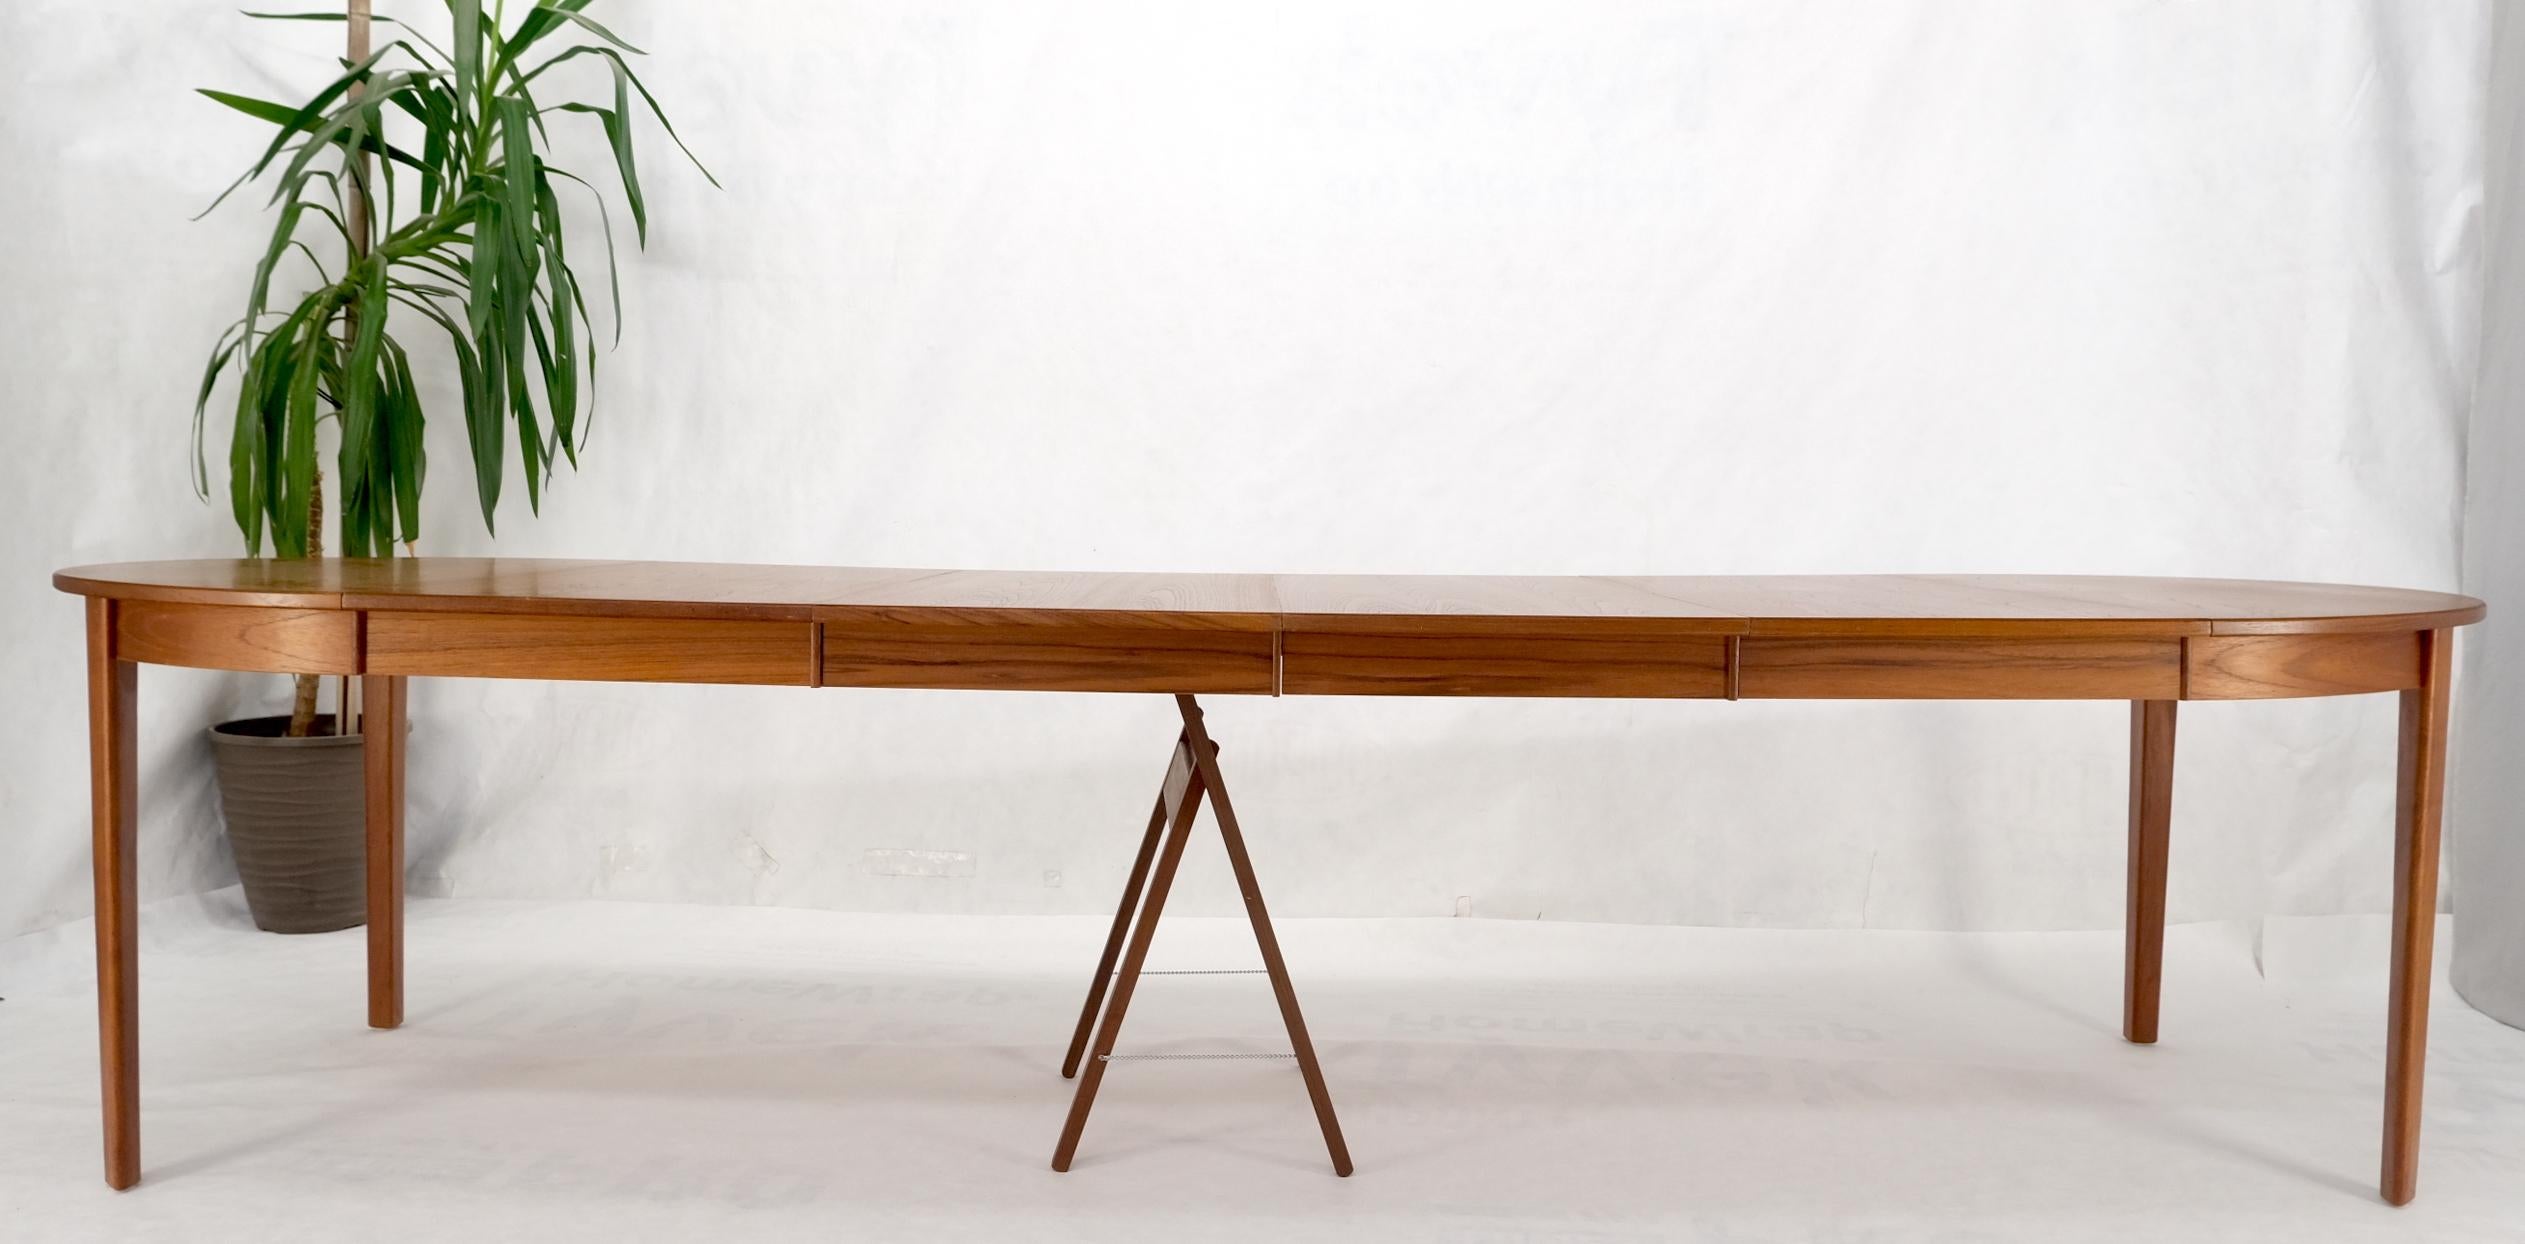 Danish Teak Mid Century Modern Round Dining Banquet Conference Table 4 Leaf MINT For Sale 13